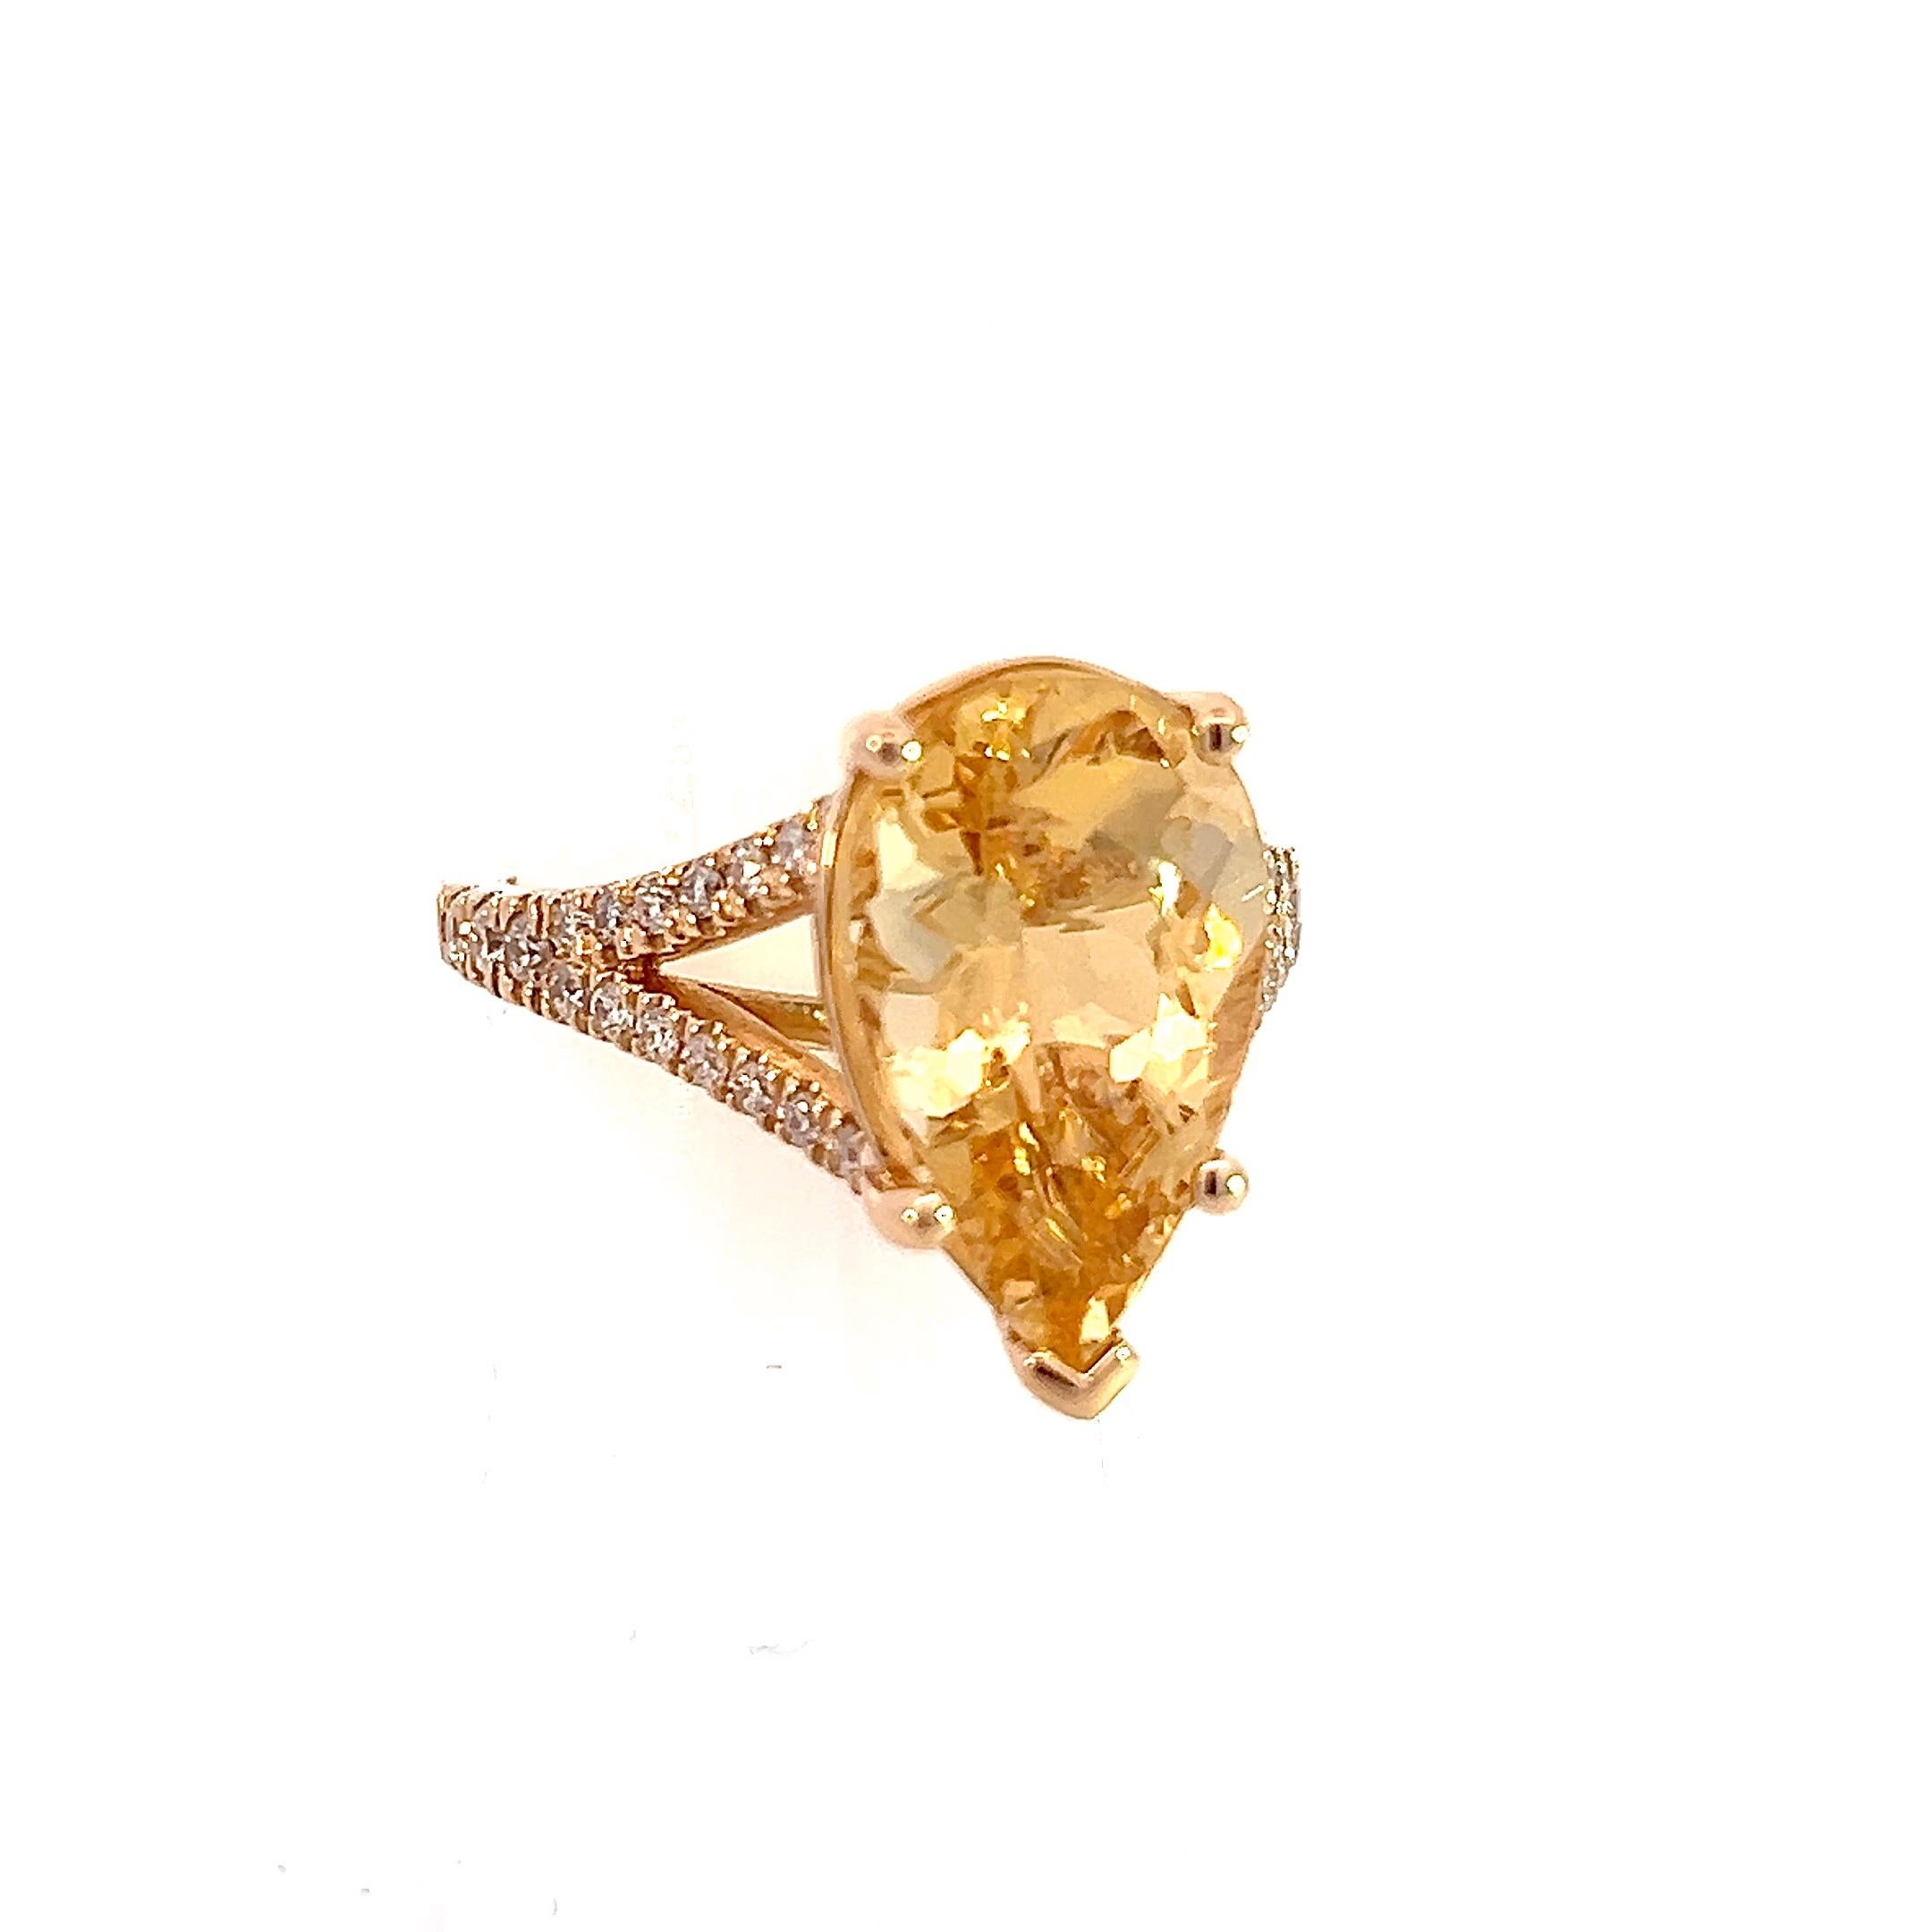 Natural Citrine Diamond Ring 6.5 14k Y Gold 4.79 TCW Certified For Sale 1